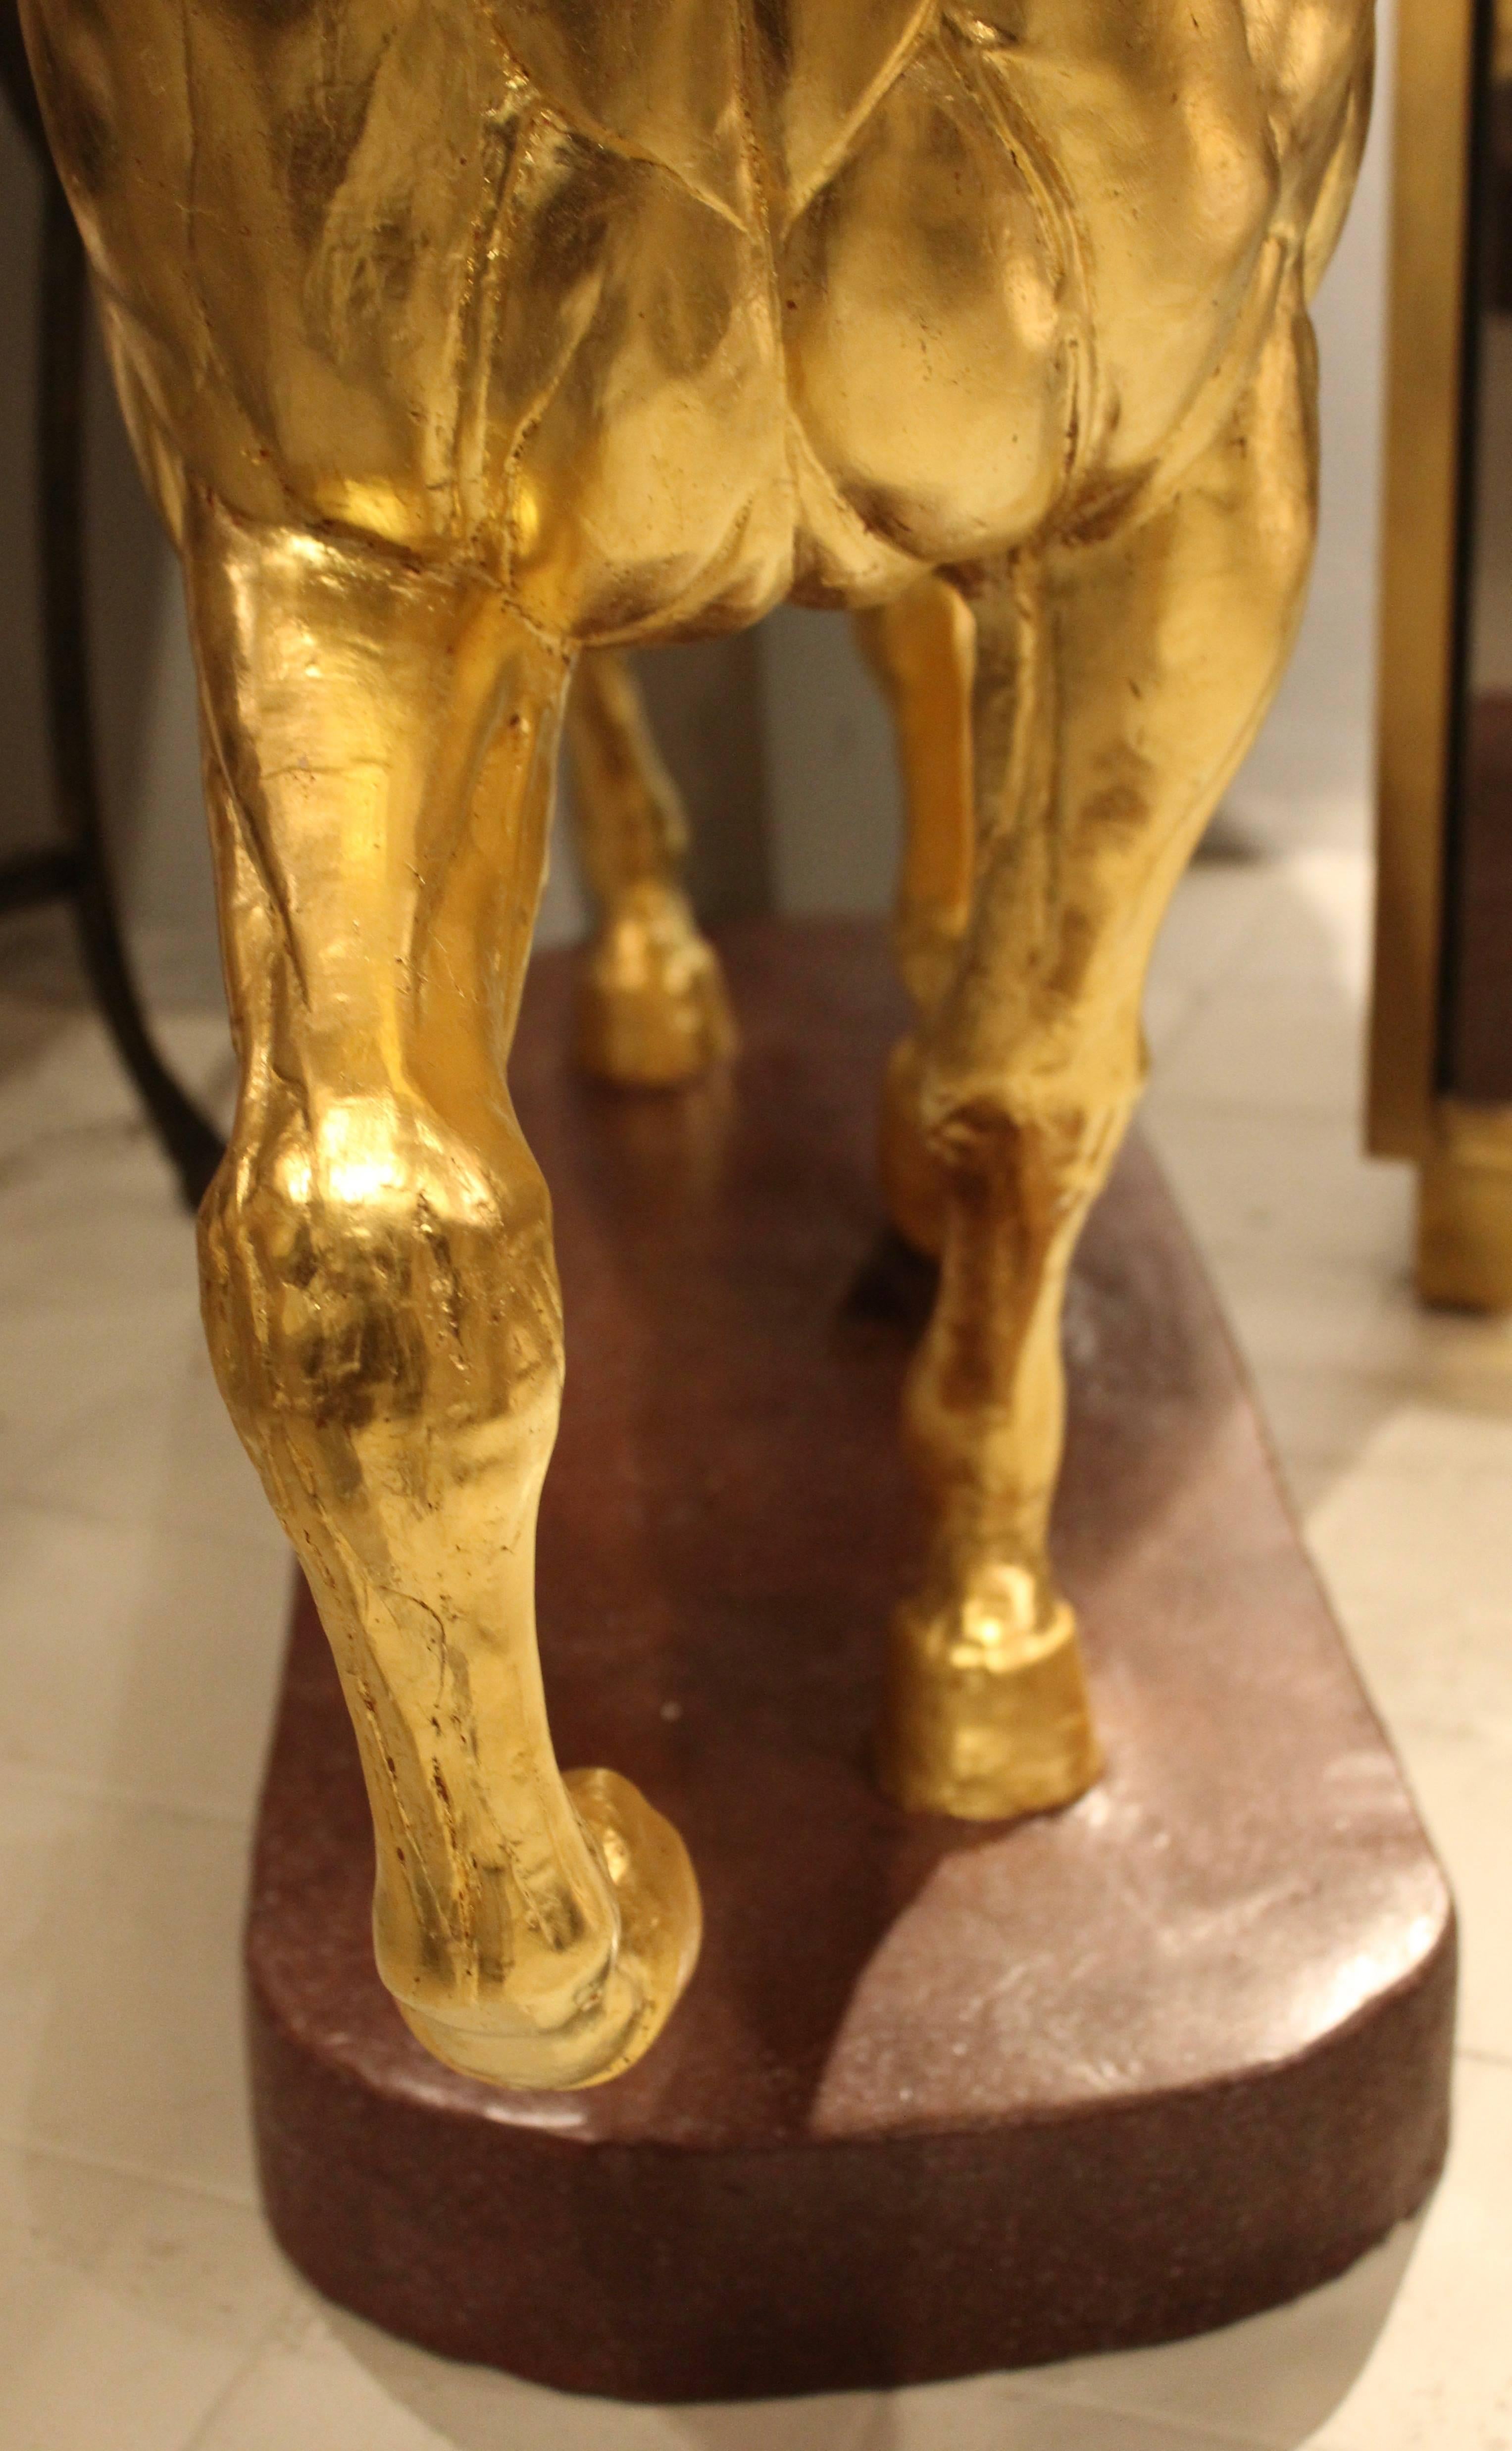 Pair of Italian Gilded Plaster Flayed Pacing Horses Late 19th-Early 20th Century For Sale 2